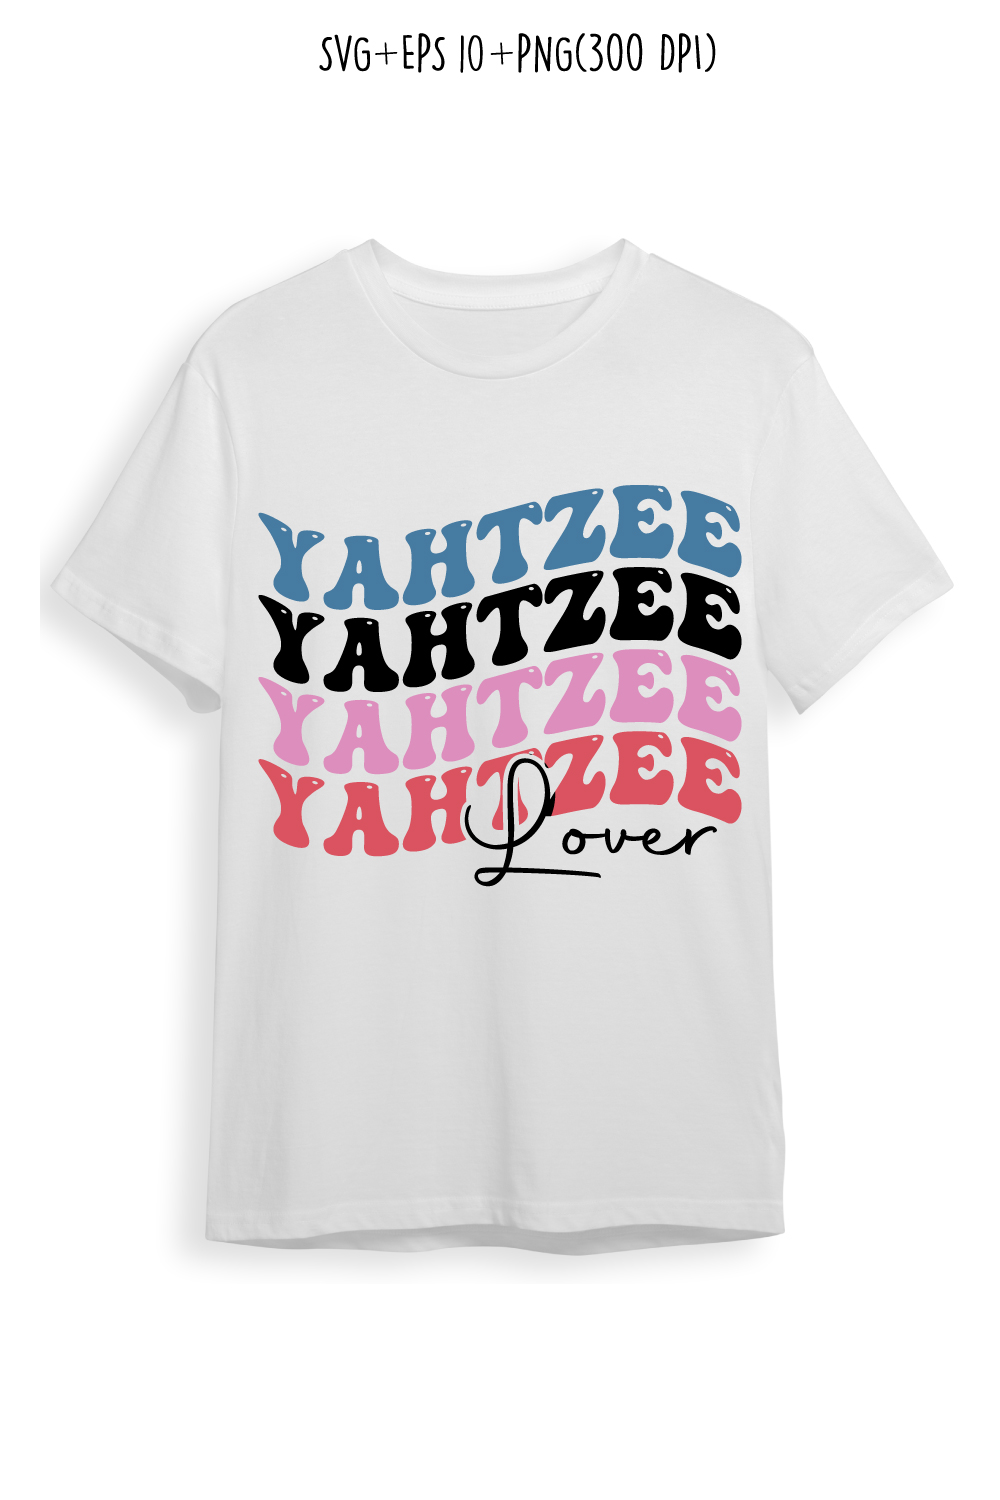 Yahtzee lover indoor game retro typography design for t-shirts, cards, frame artwork, phone cases, bags, mugs, stickers, tumblers, print, etc pinterest preview image.